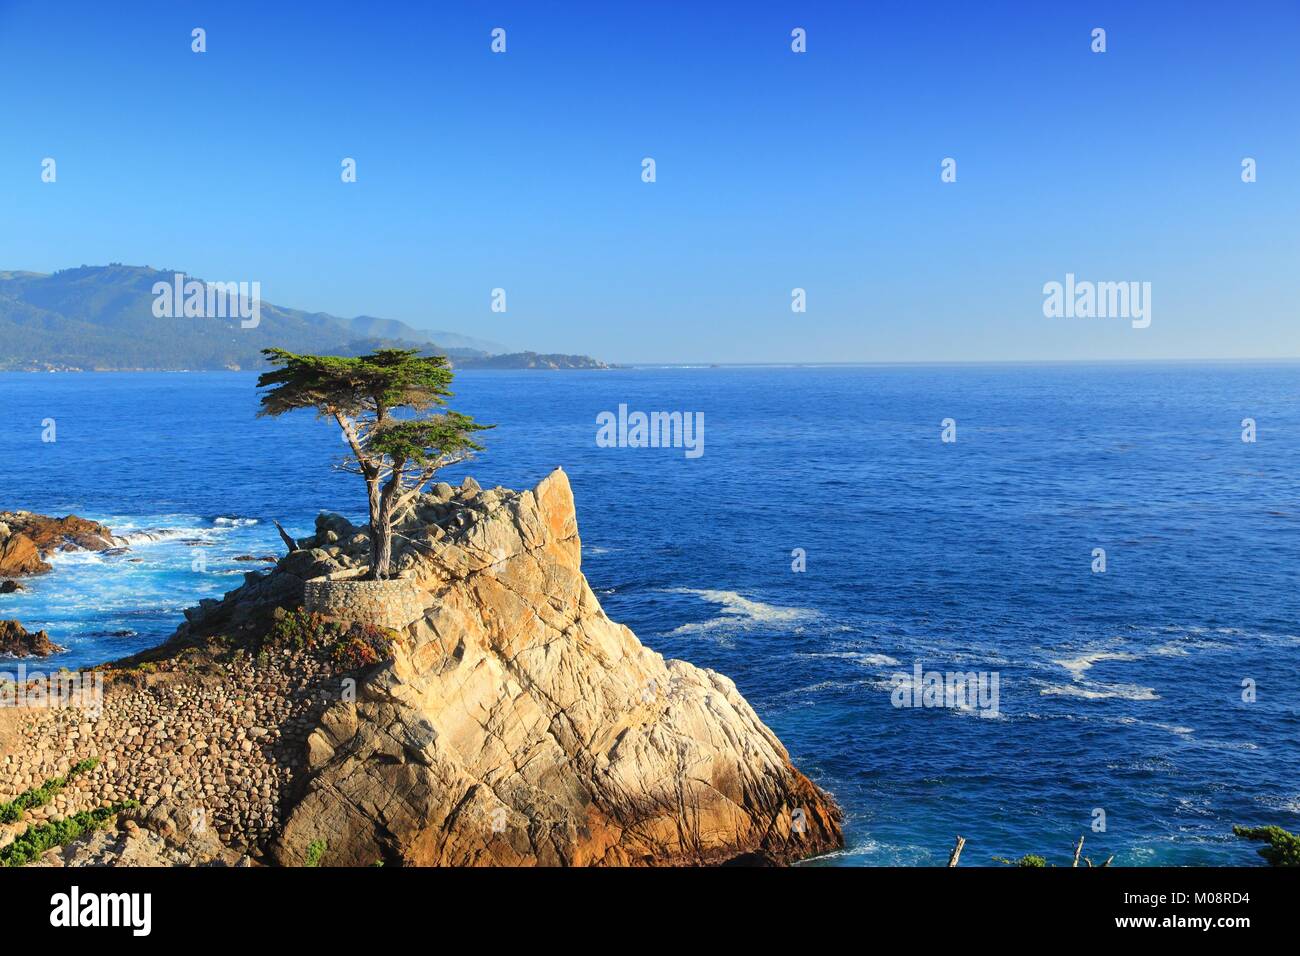 MONTEREY, CALIFORNIA - APRIL 7, 2014: Lone Cypress tree view along famous 17 Mile Drive in Monterey. Sources claim it is one of the most photographed  Stock Photo